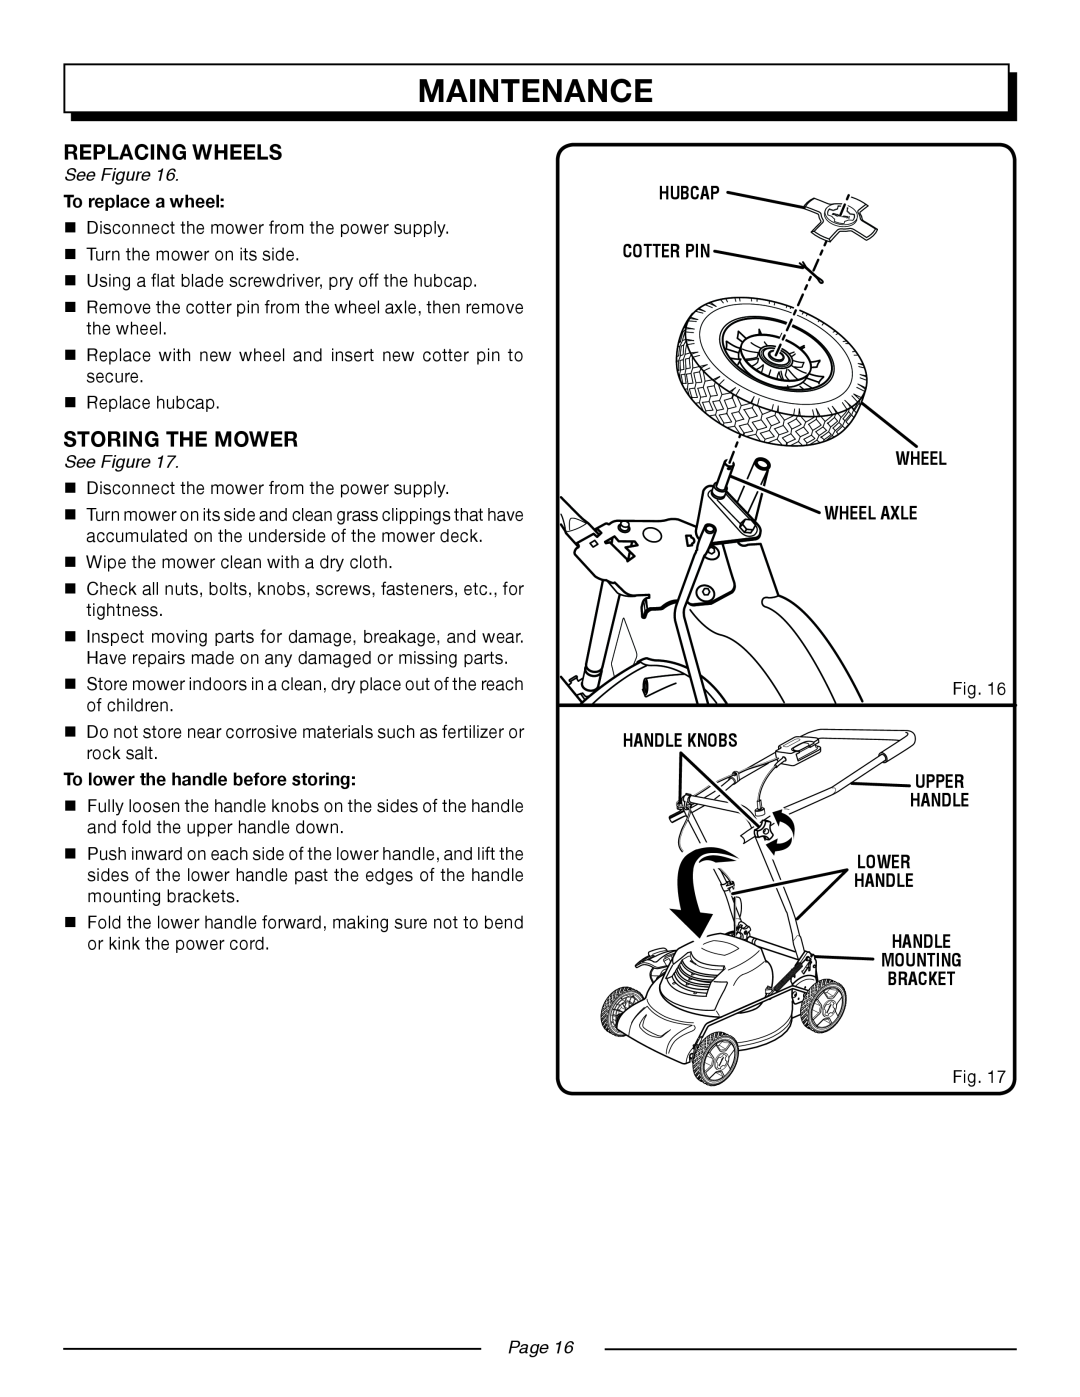 Homelite UT13218 Replacing Wheels, Storing The Mower, Maintenance, See Figure, To replace a wheel, Page, Mounting Bracket 